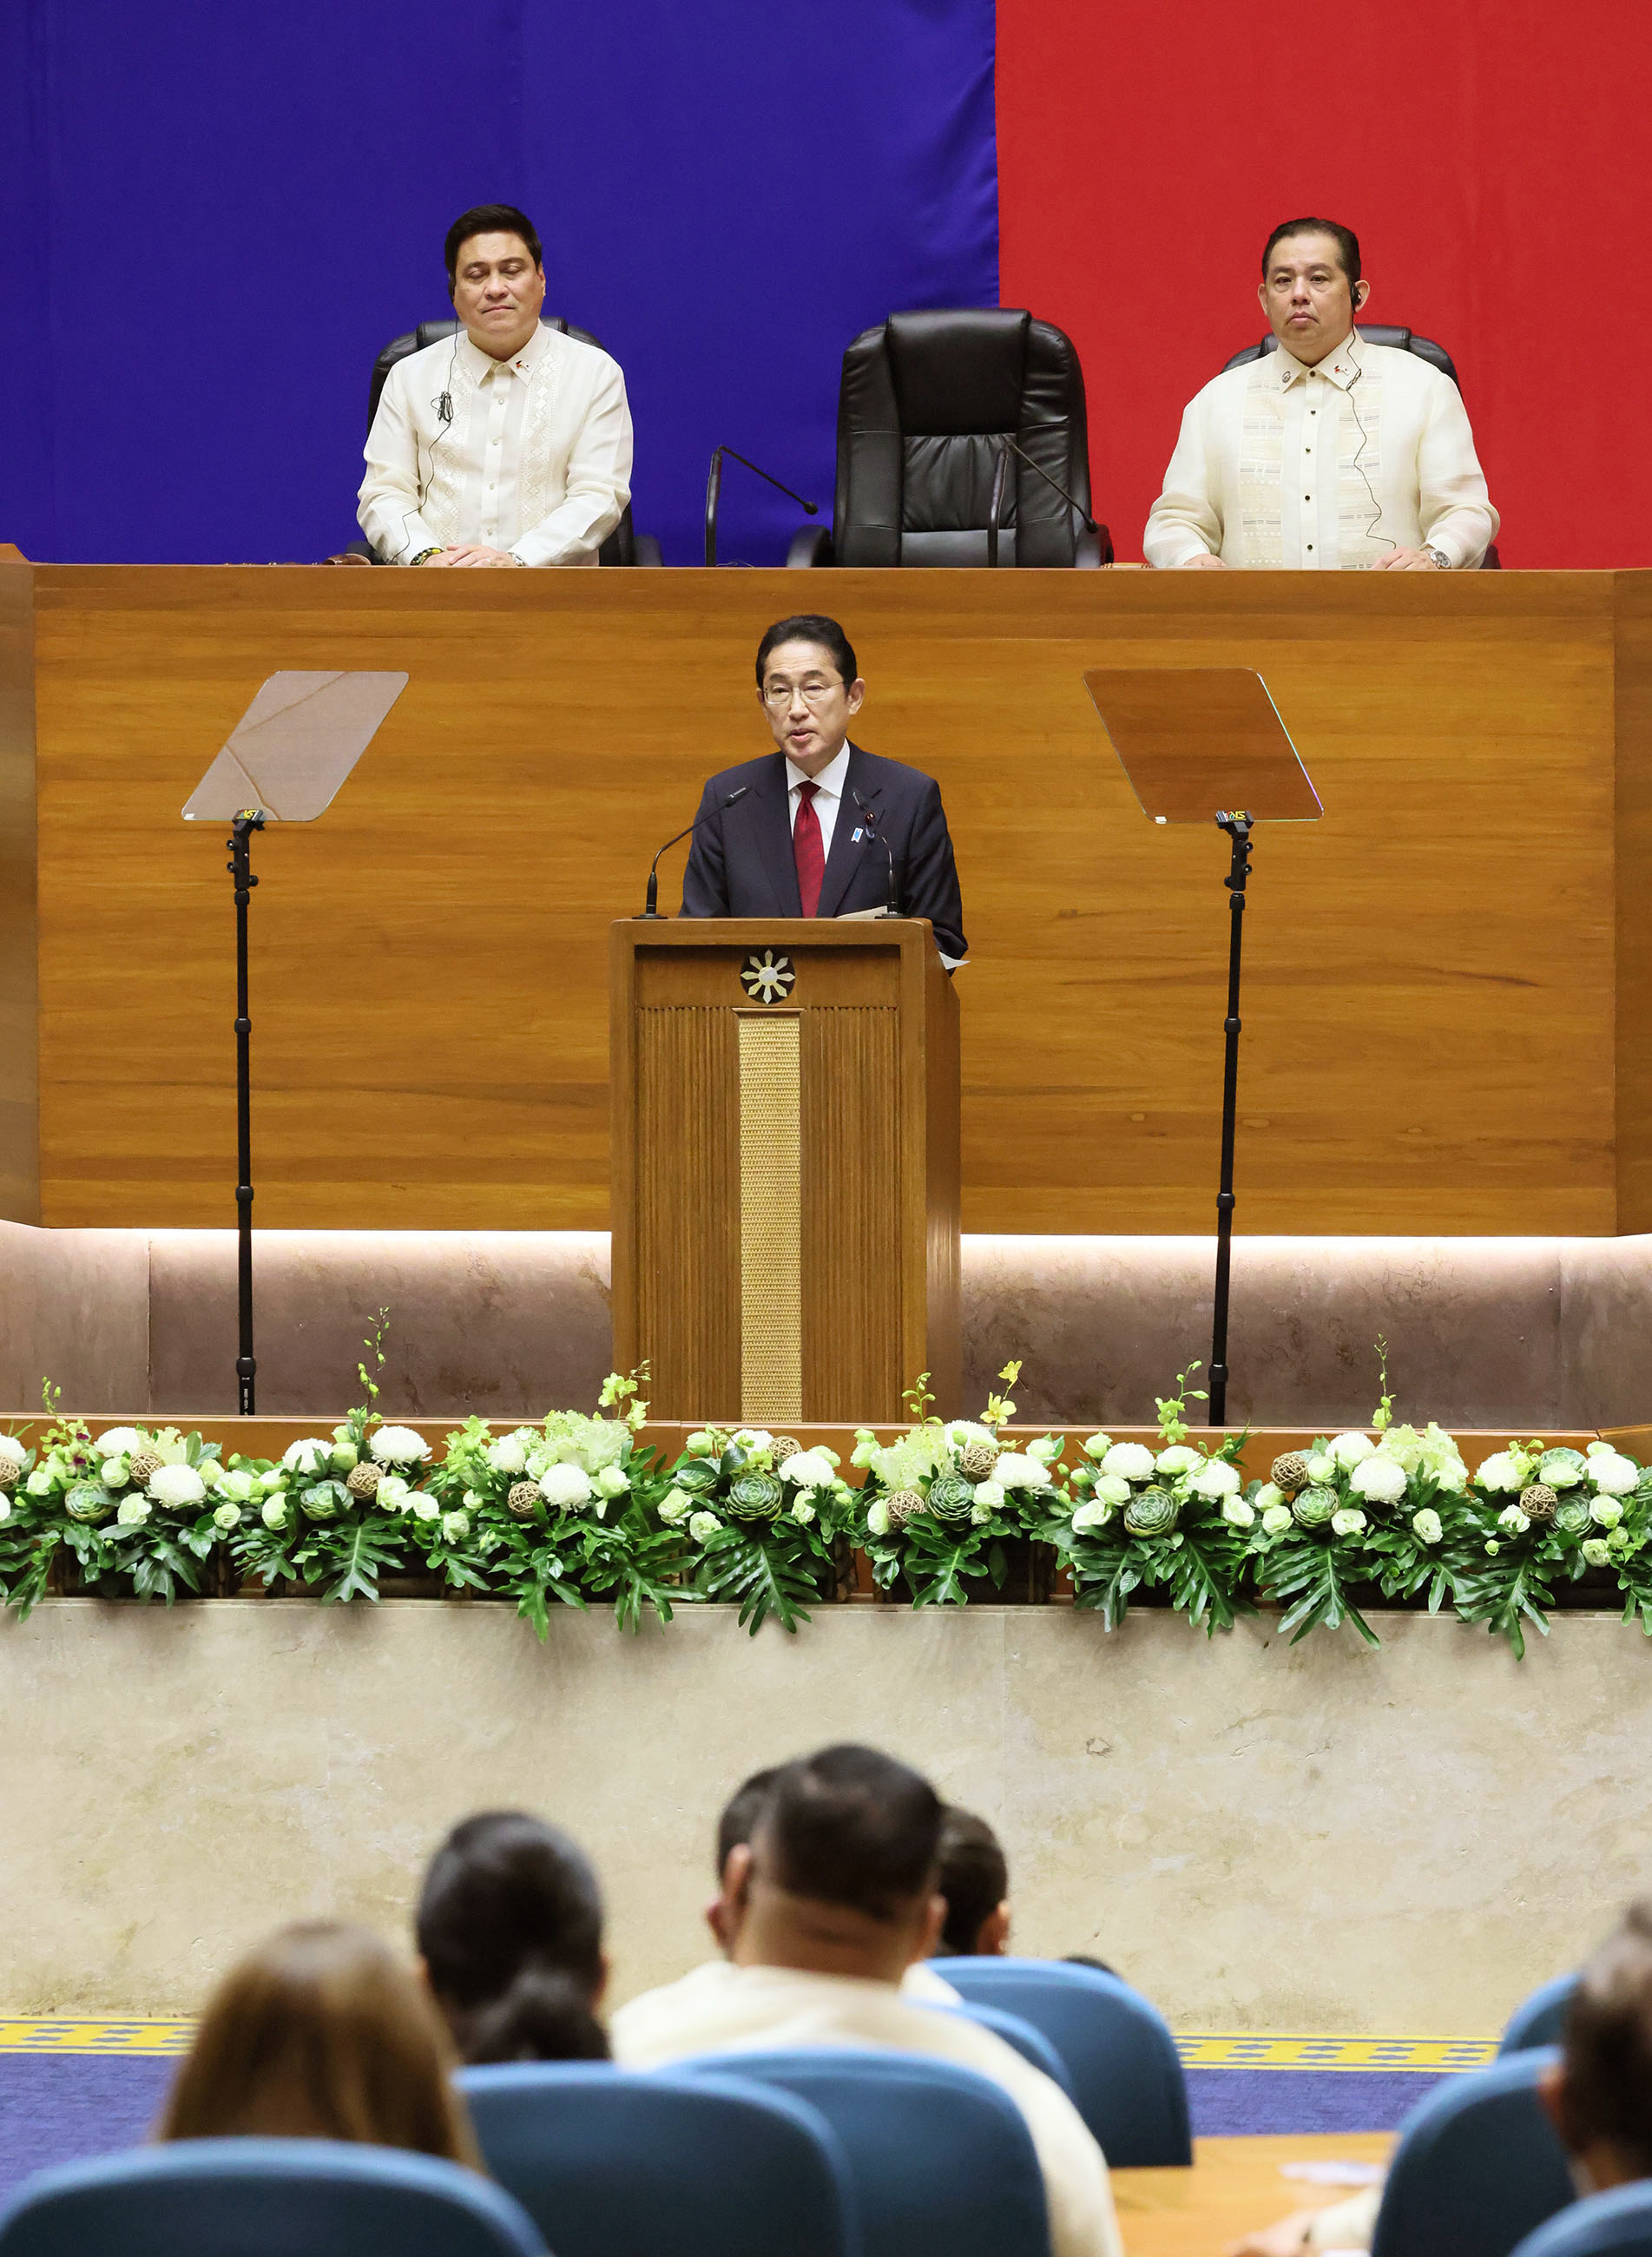 Prime Minister Kishida delivering a policy speech at the Joint Session of the Philippine Senate and House of Representatives (4)